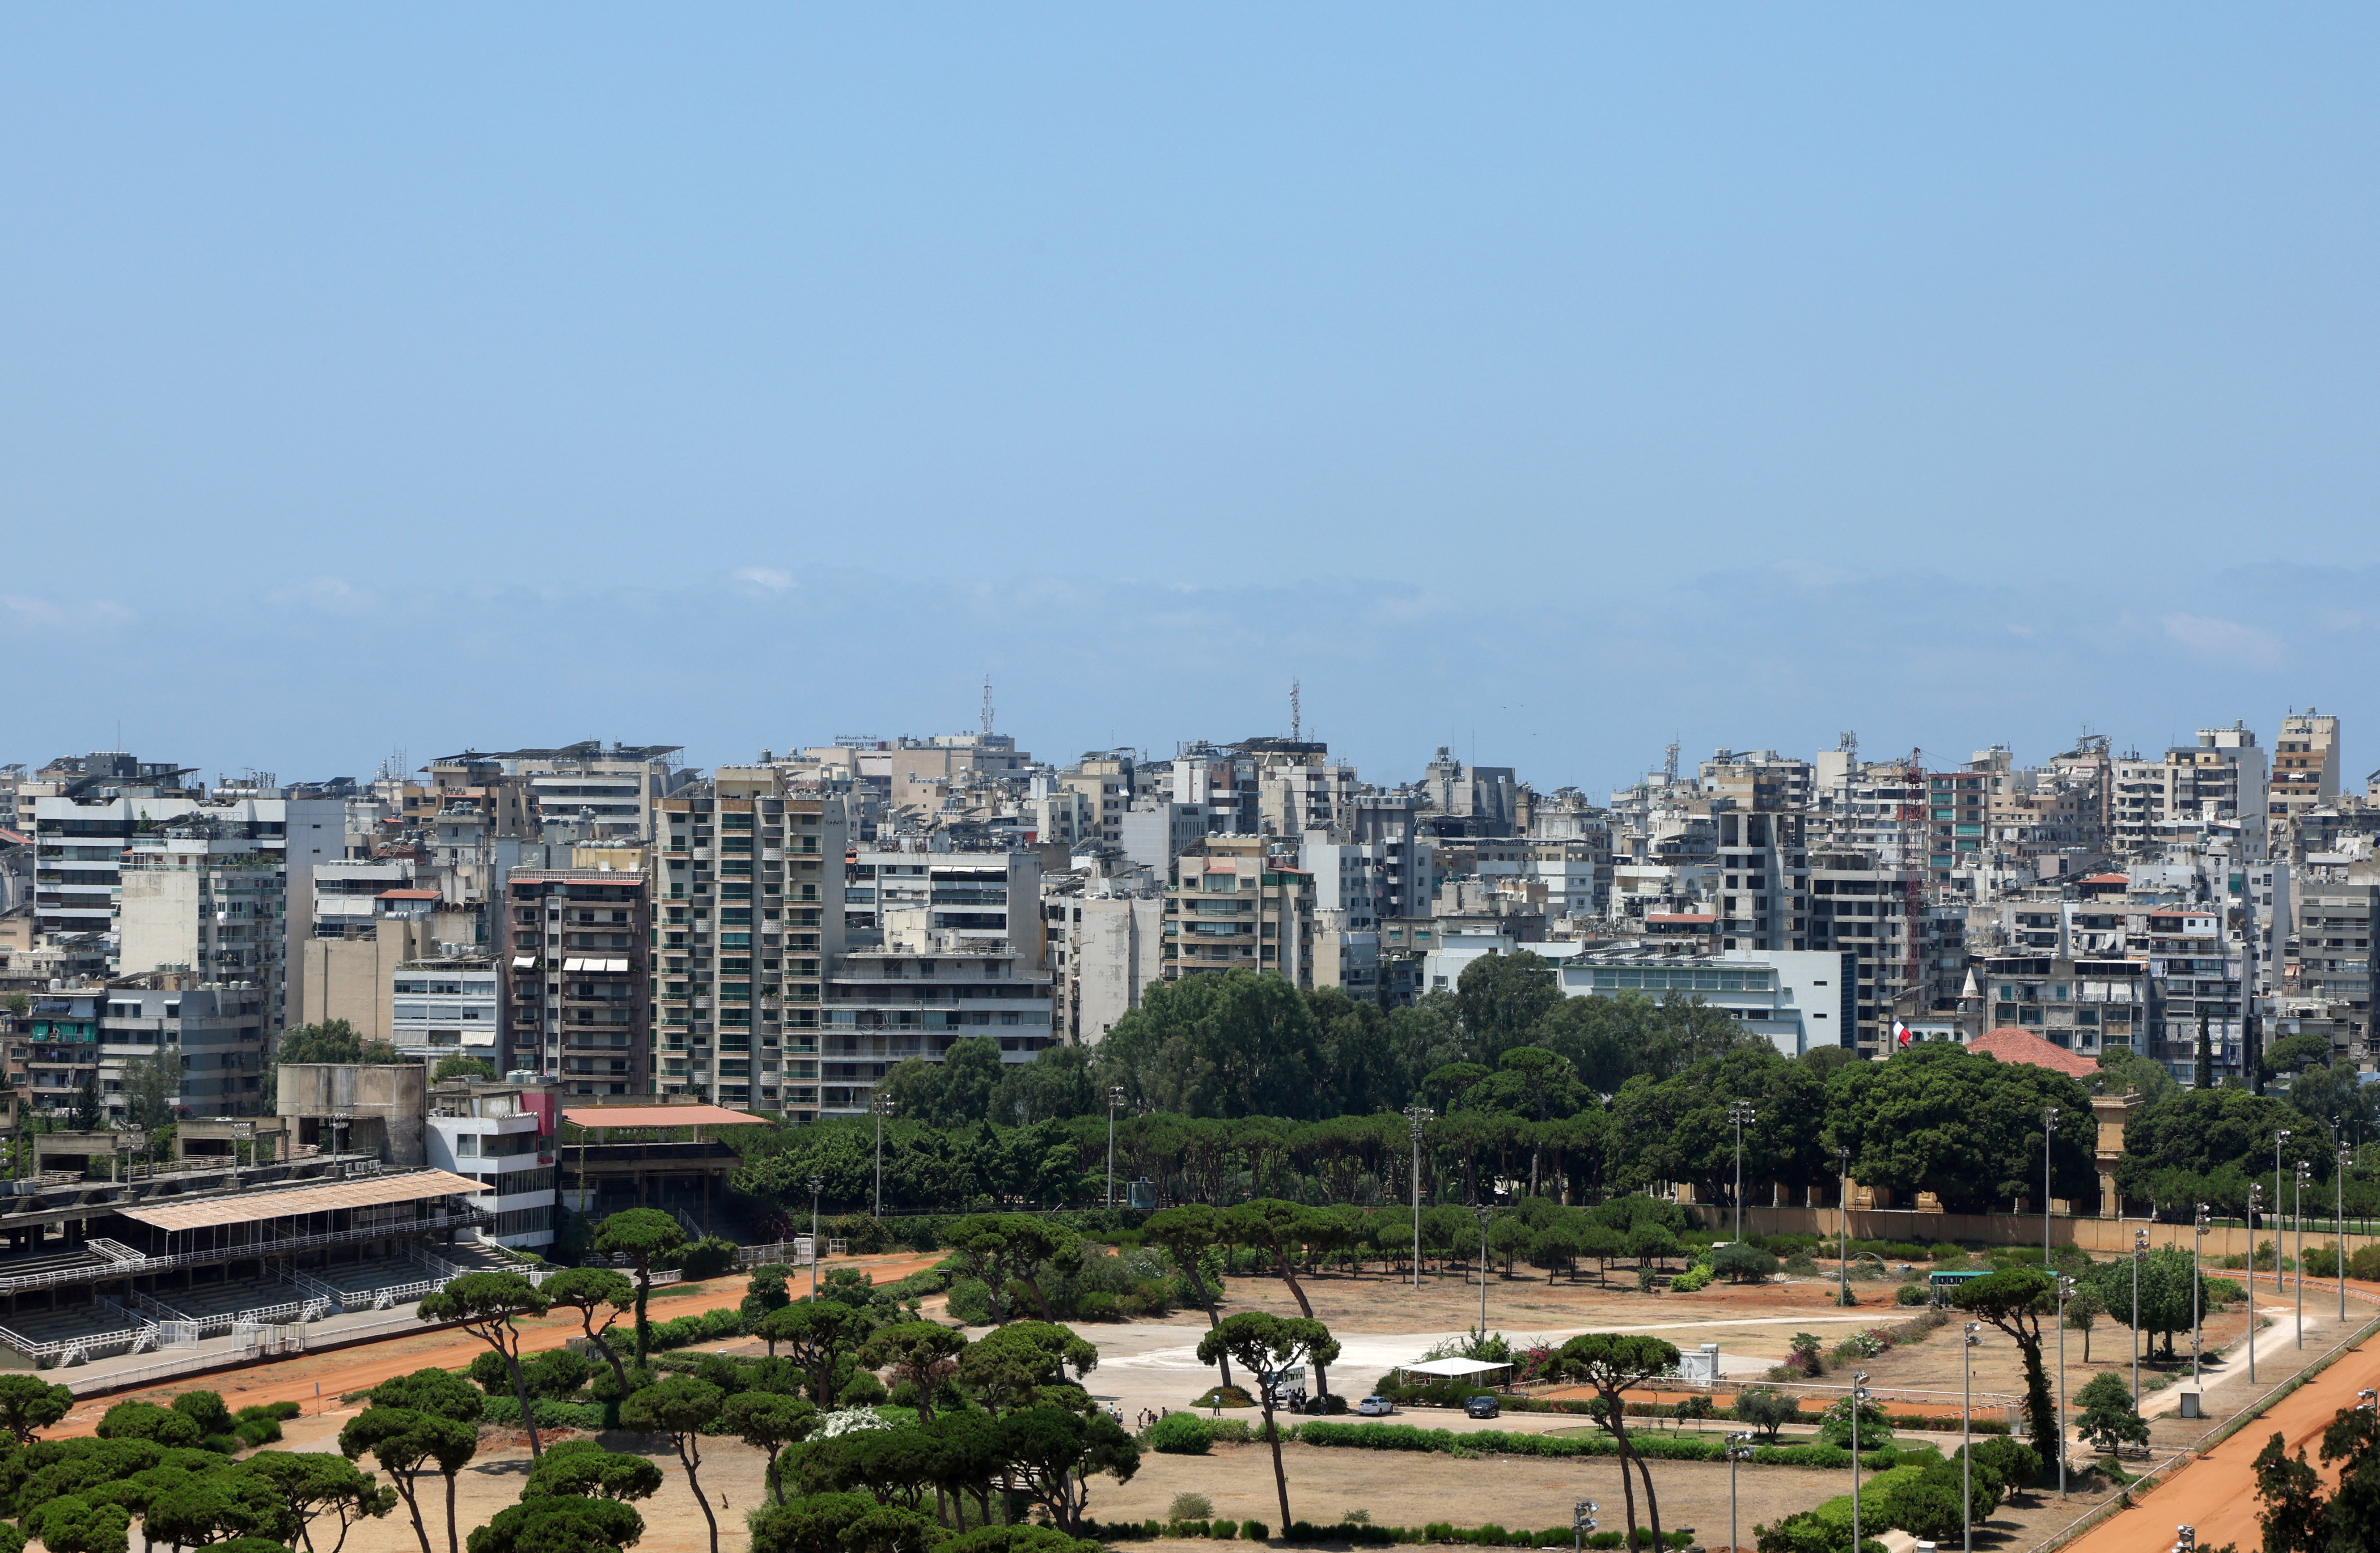 A view shows residential buildings in Beirut